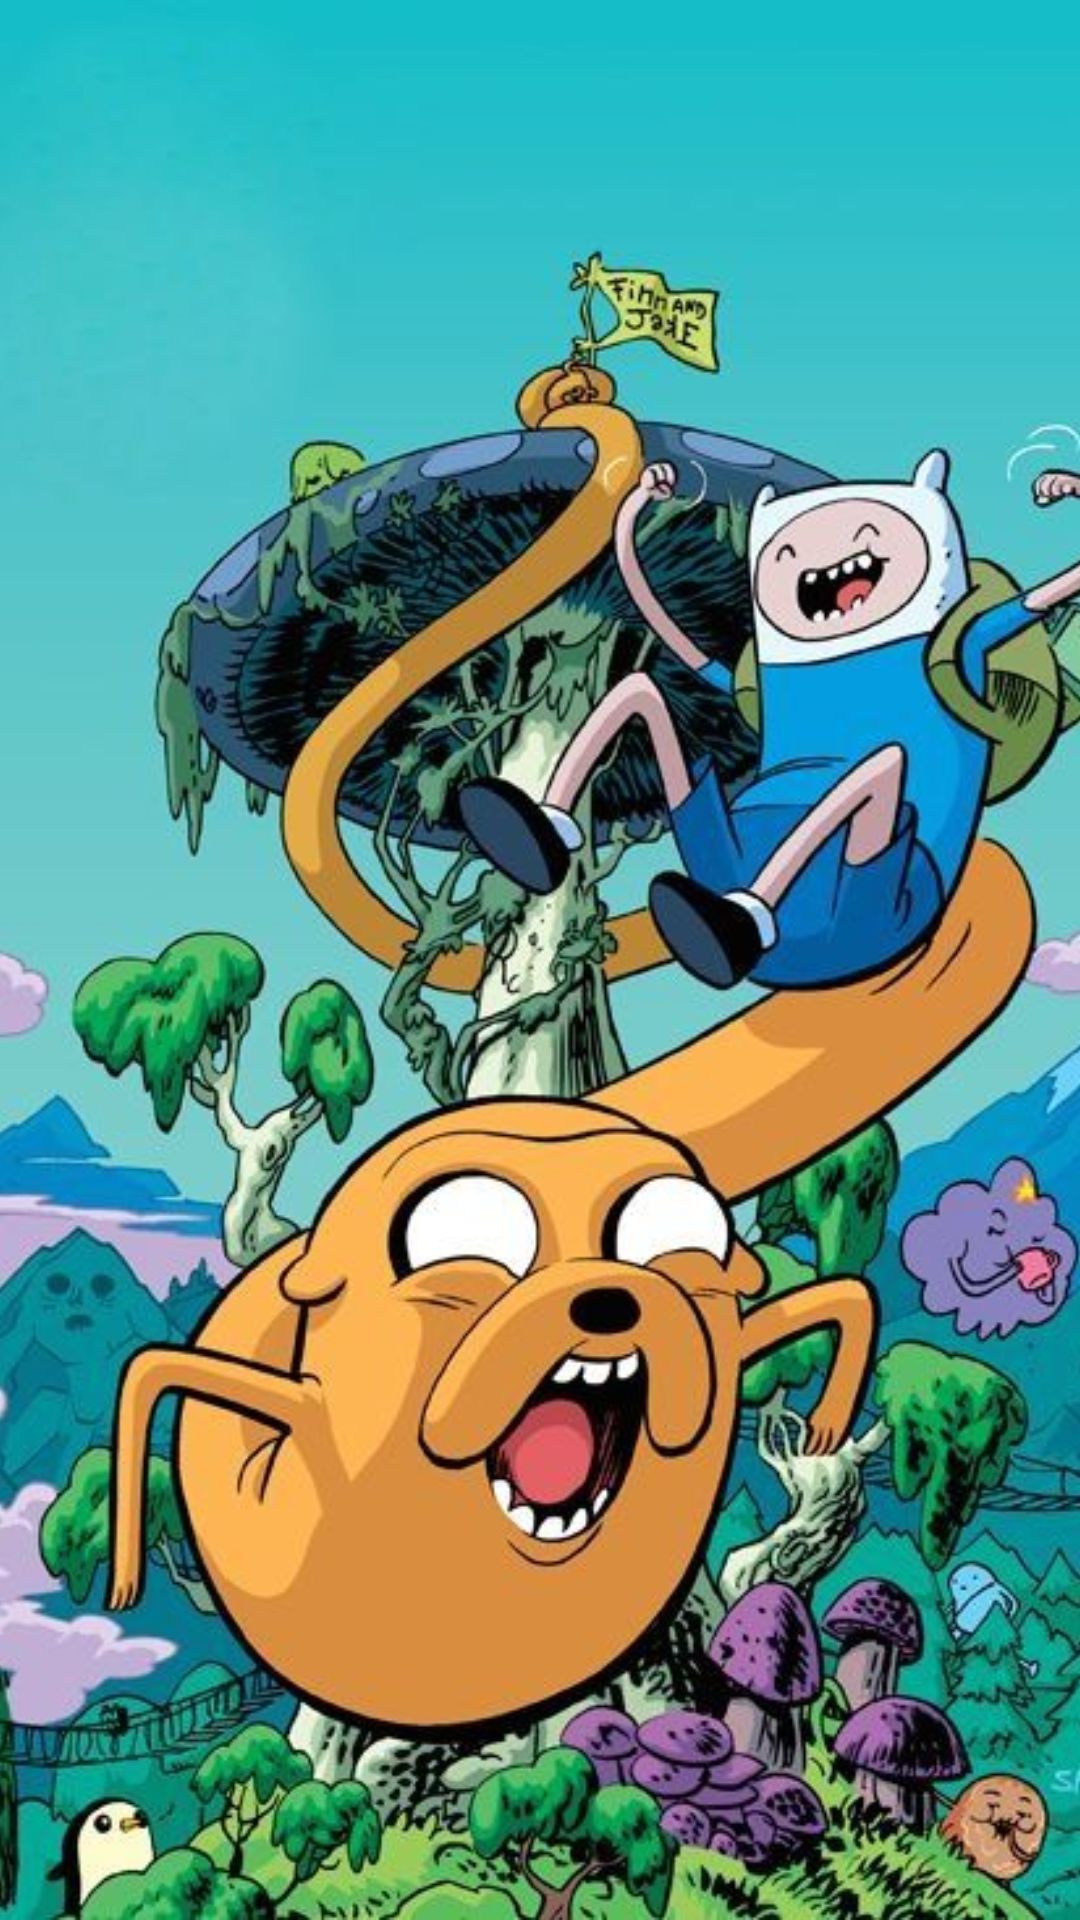 Adventure Time Jake and Finn wallpaper for iPhone with resolution 1080X1920 pixel. You can make this wallpaper for your iPhone 5, 6, 7, 8, X backgrounds, Mobile Screensaver, or iPad Lock Screen - Adventure Time